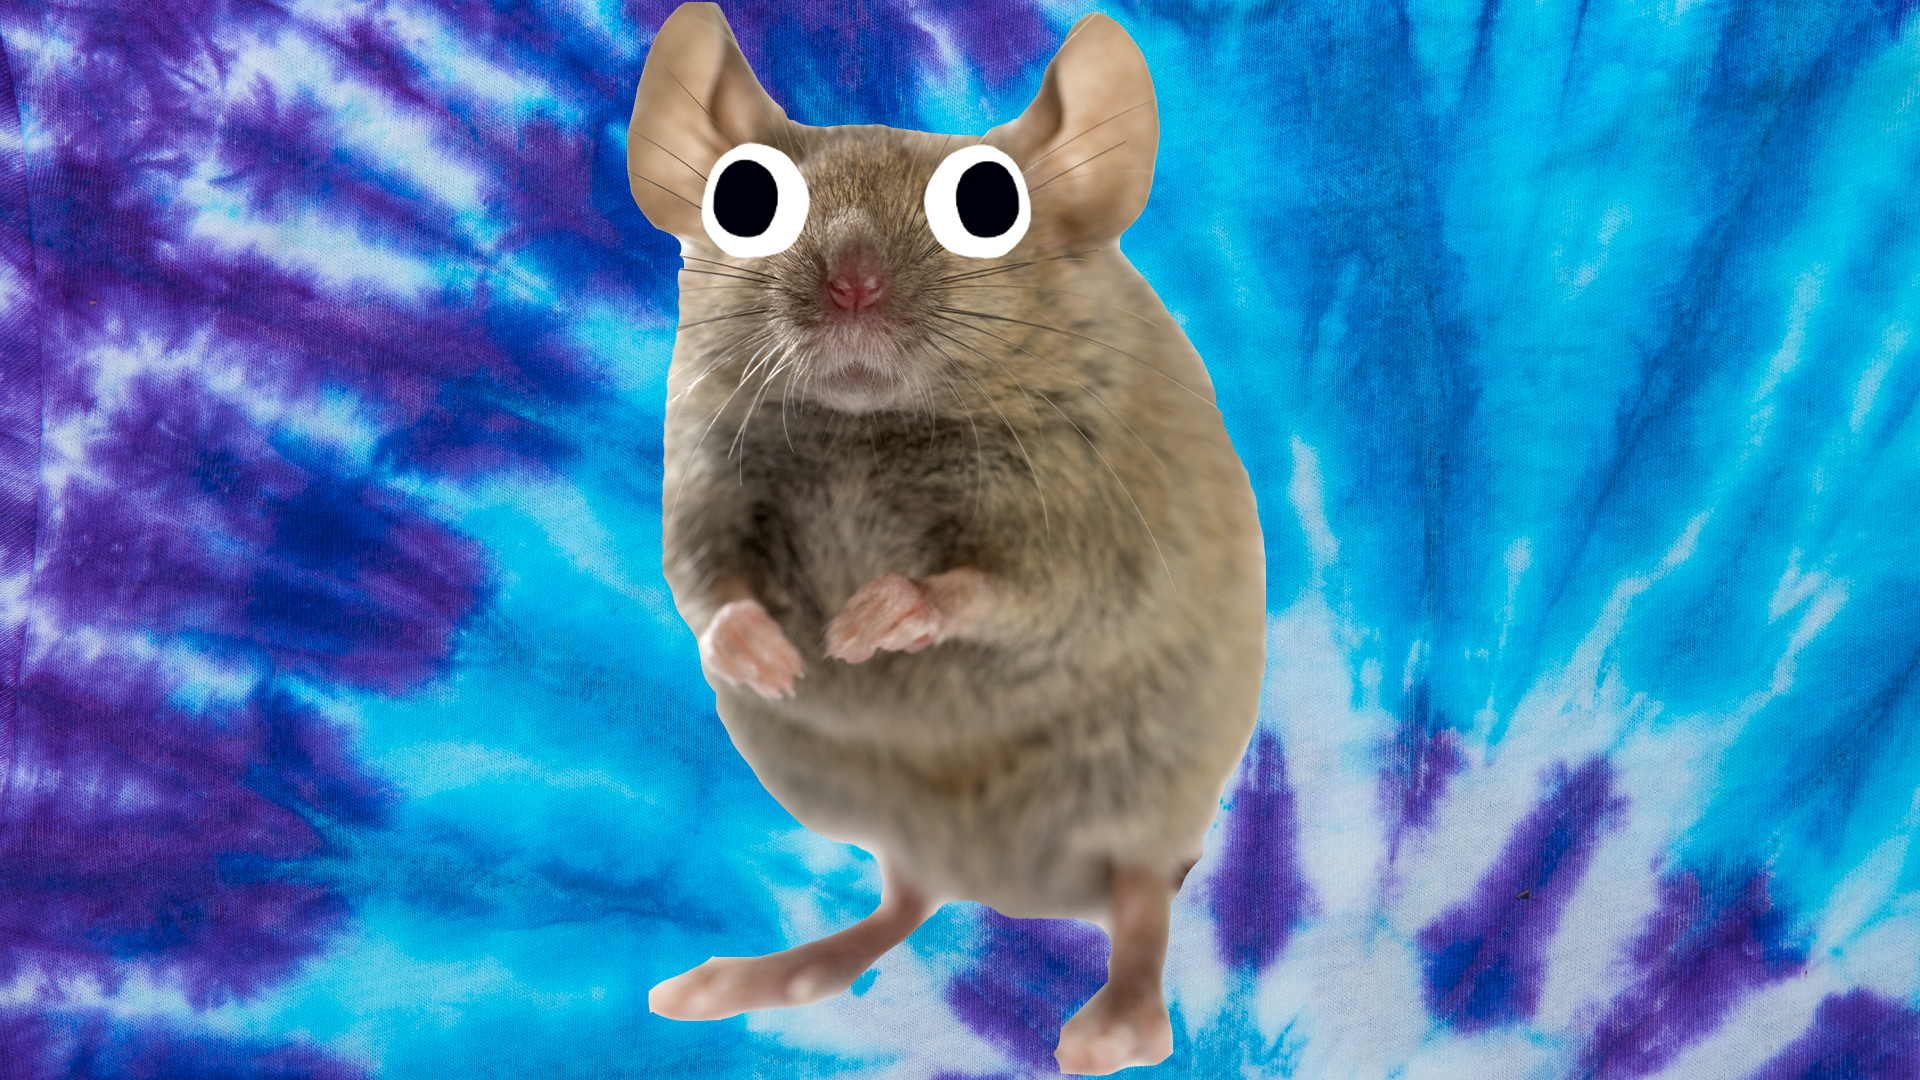 Mouse on blue background